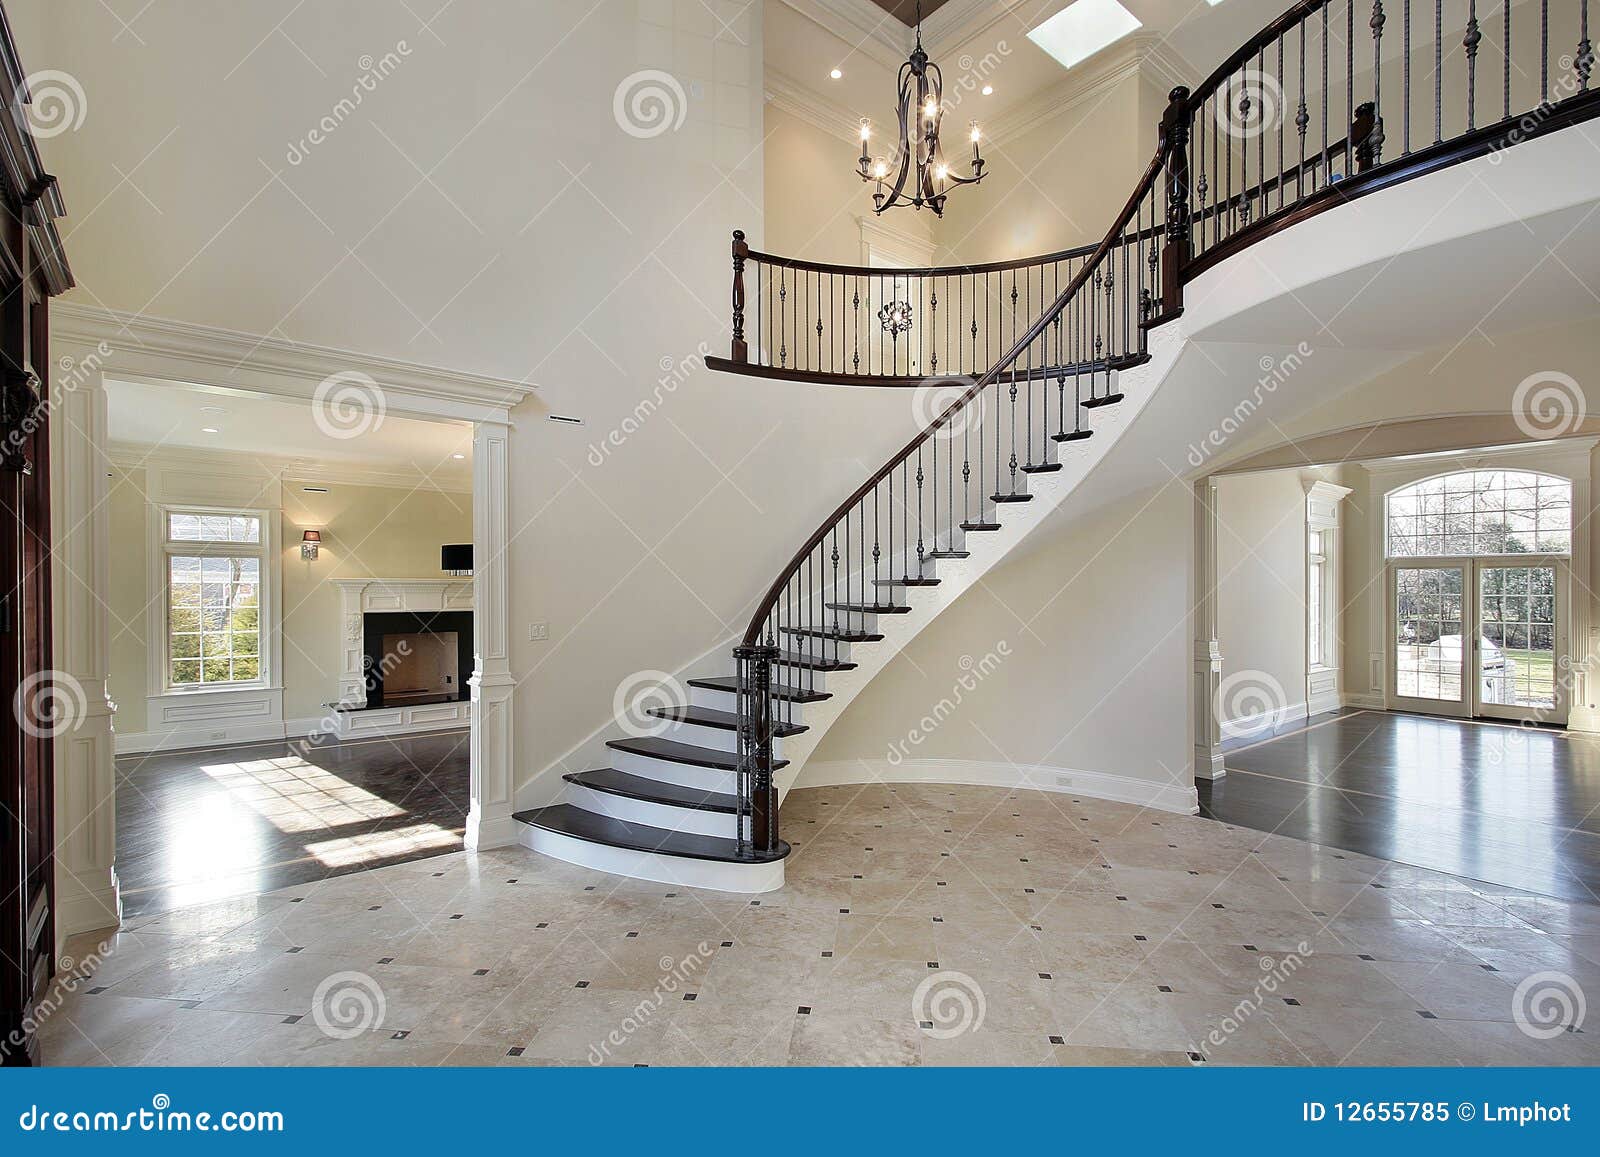 Foyer With Circular Staircase Royalty Free Stock Photo - Image ...